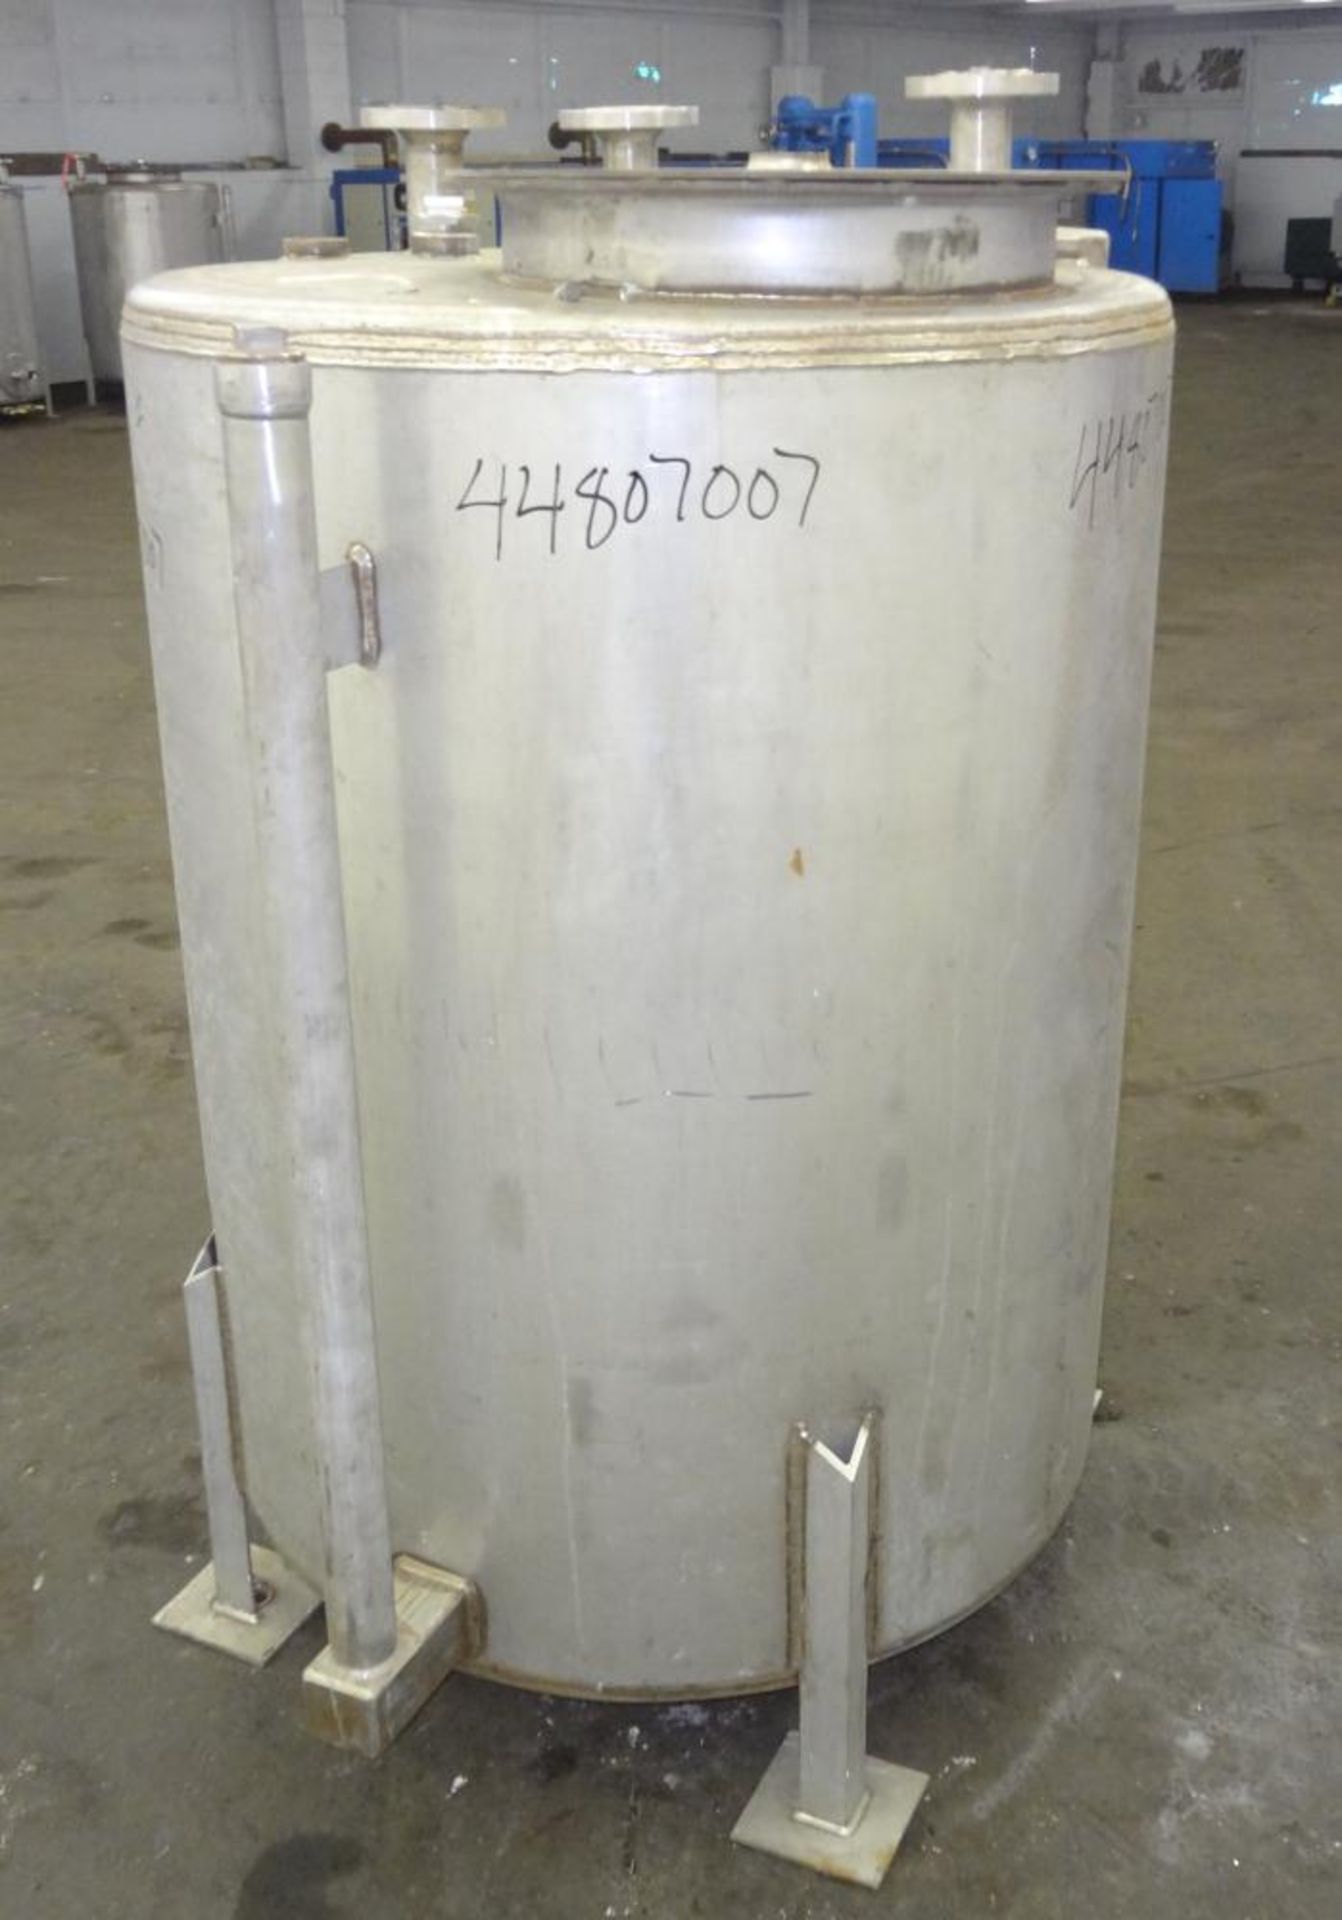 Kettle, 225 Gallon, 316 Stainless Steel, Vertical. Approximately 38" diameter x 49" straight side, - Image 4 of 9